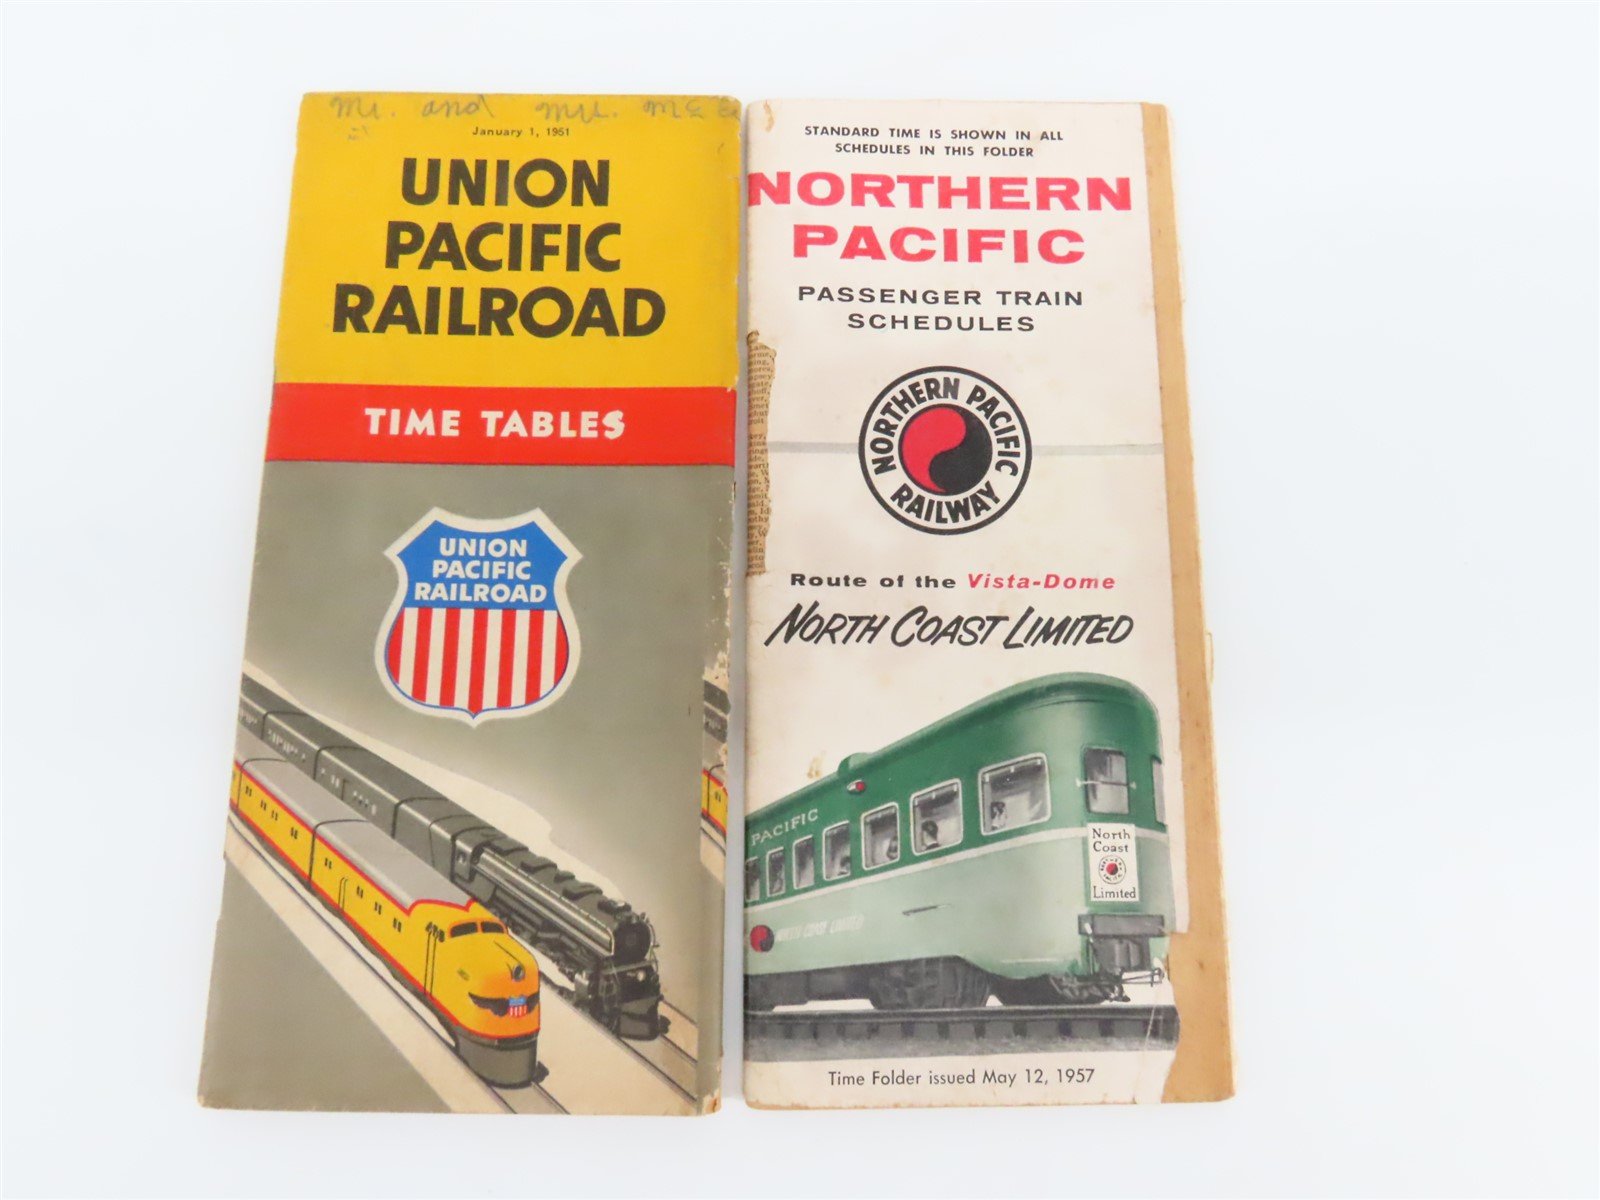 Time Tables: Union Pacific - Jan. 1, 1951 & Northern Pacific - May 12, 1957